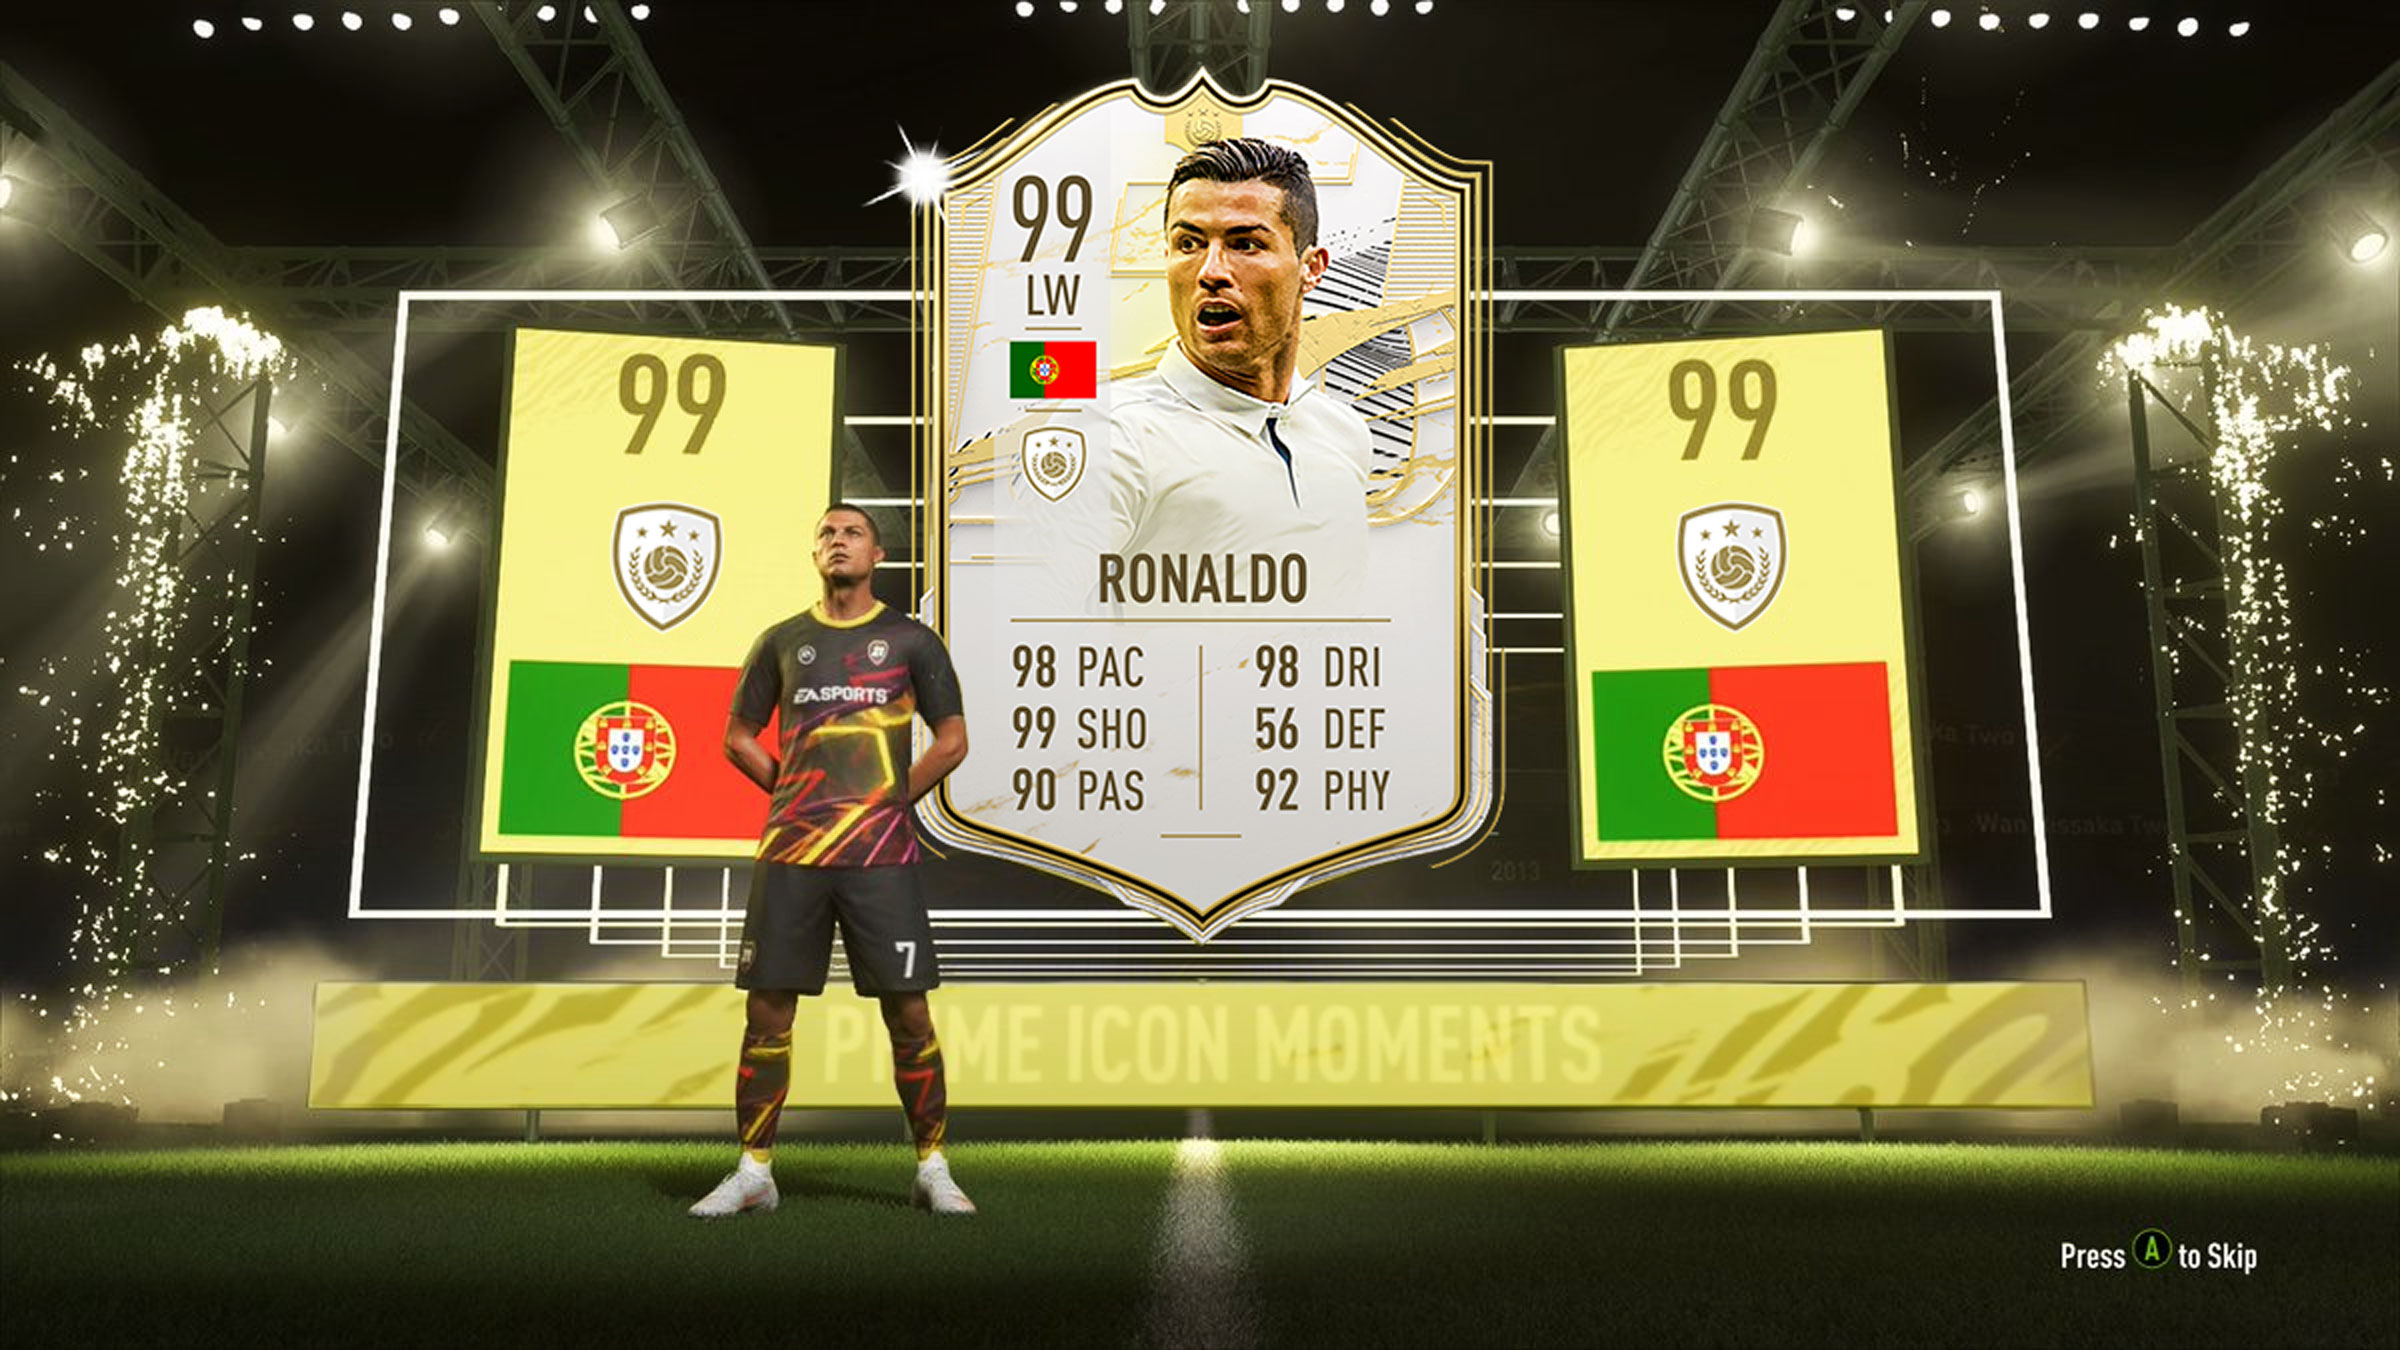 CAMZedits on X: Prime Icon Moments Cristiano Ronaldo 🐐 The #GOAT will  definitely have a 99 rated icon card in the future 🔥🇵🇹 #fut22 #fifa22  #cristiano #ronaldo #cristianoronaldo #cr7edits #halamadrid #madrid #UCL #